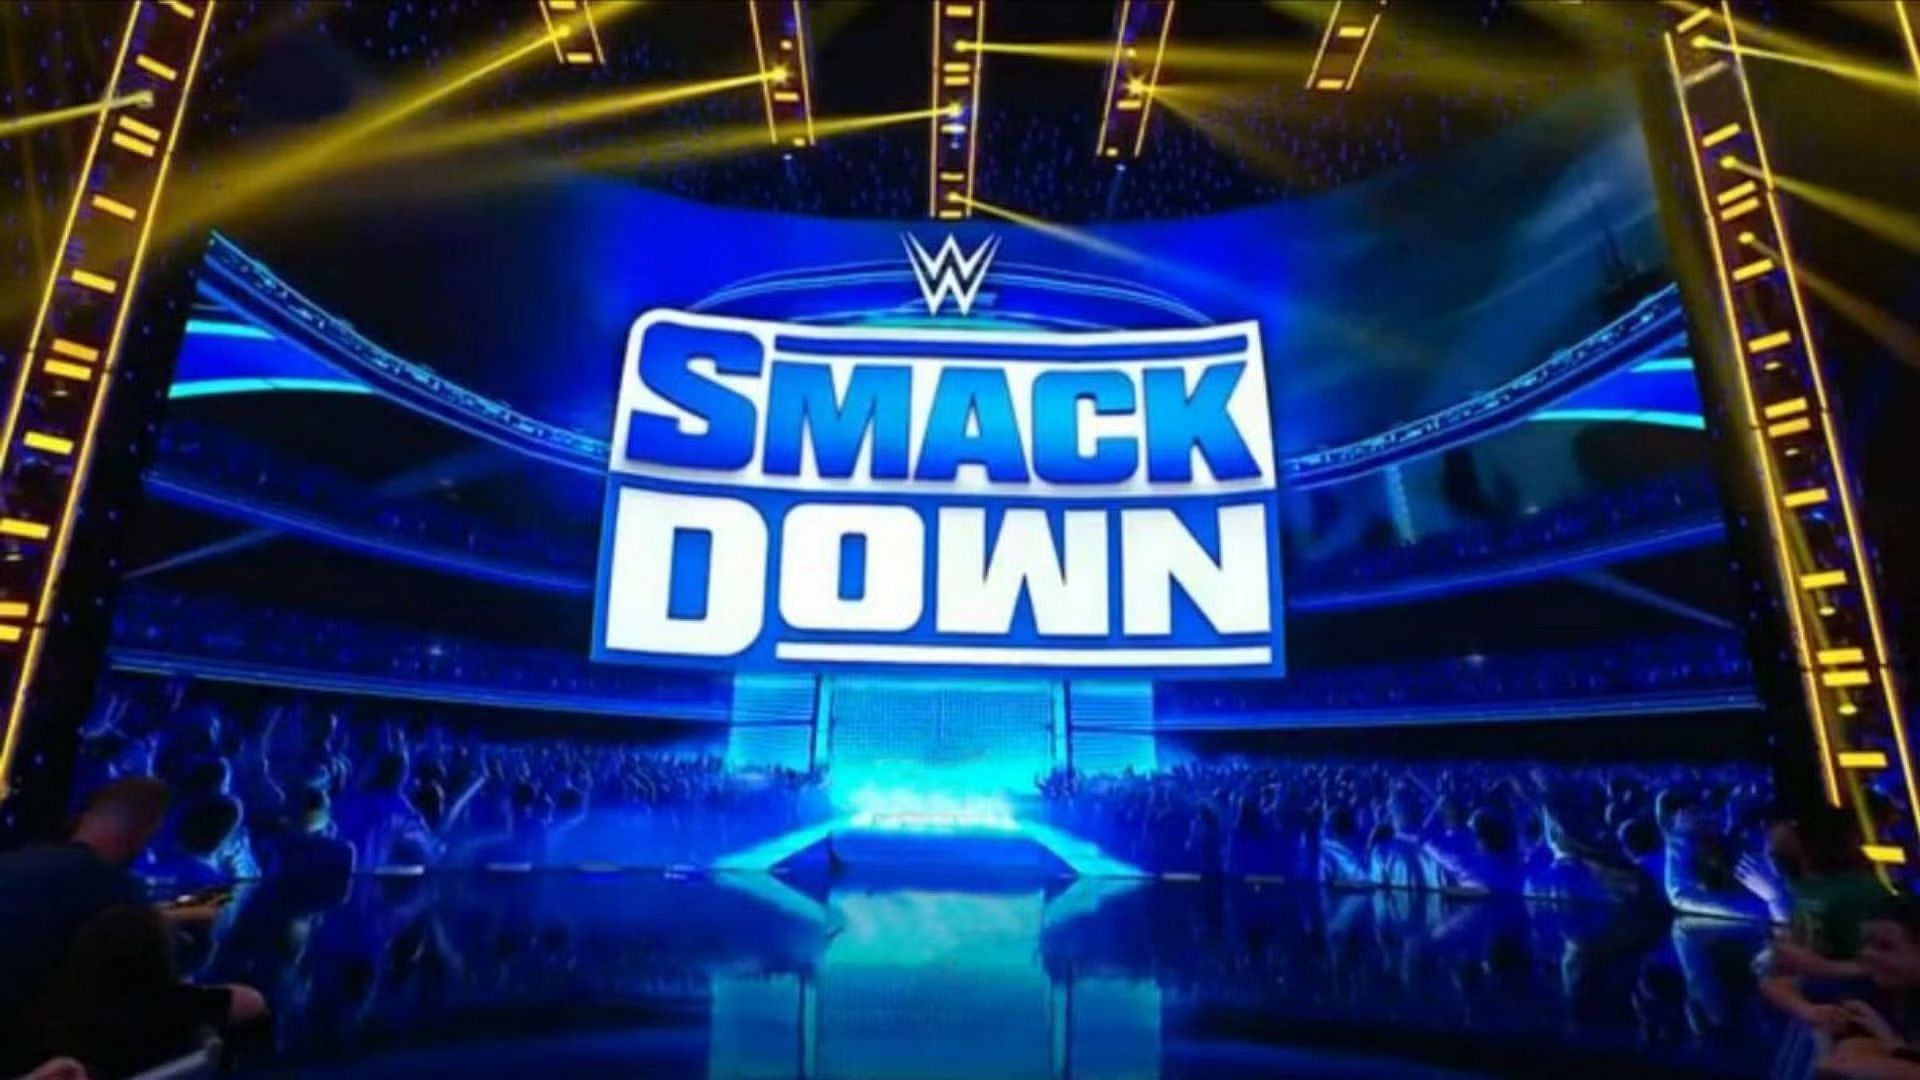 WWE SmackDown arena. Image Credits: Twitter 